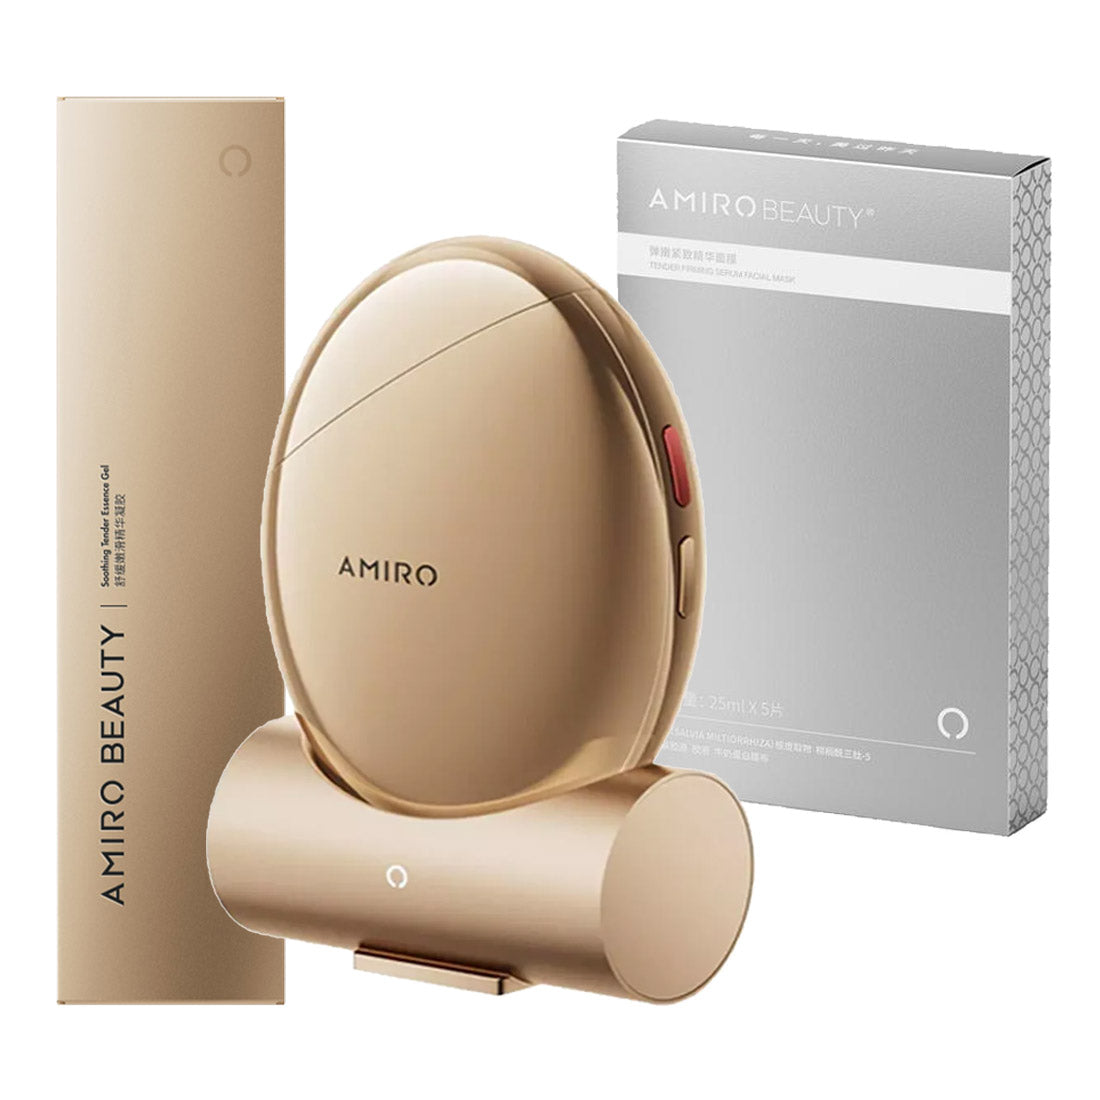 AMIRO S1 Facial RF Skin Tightening Device - Gold Limited Edition (CN Version)